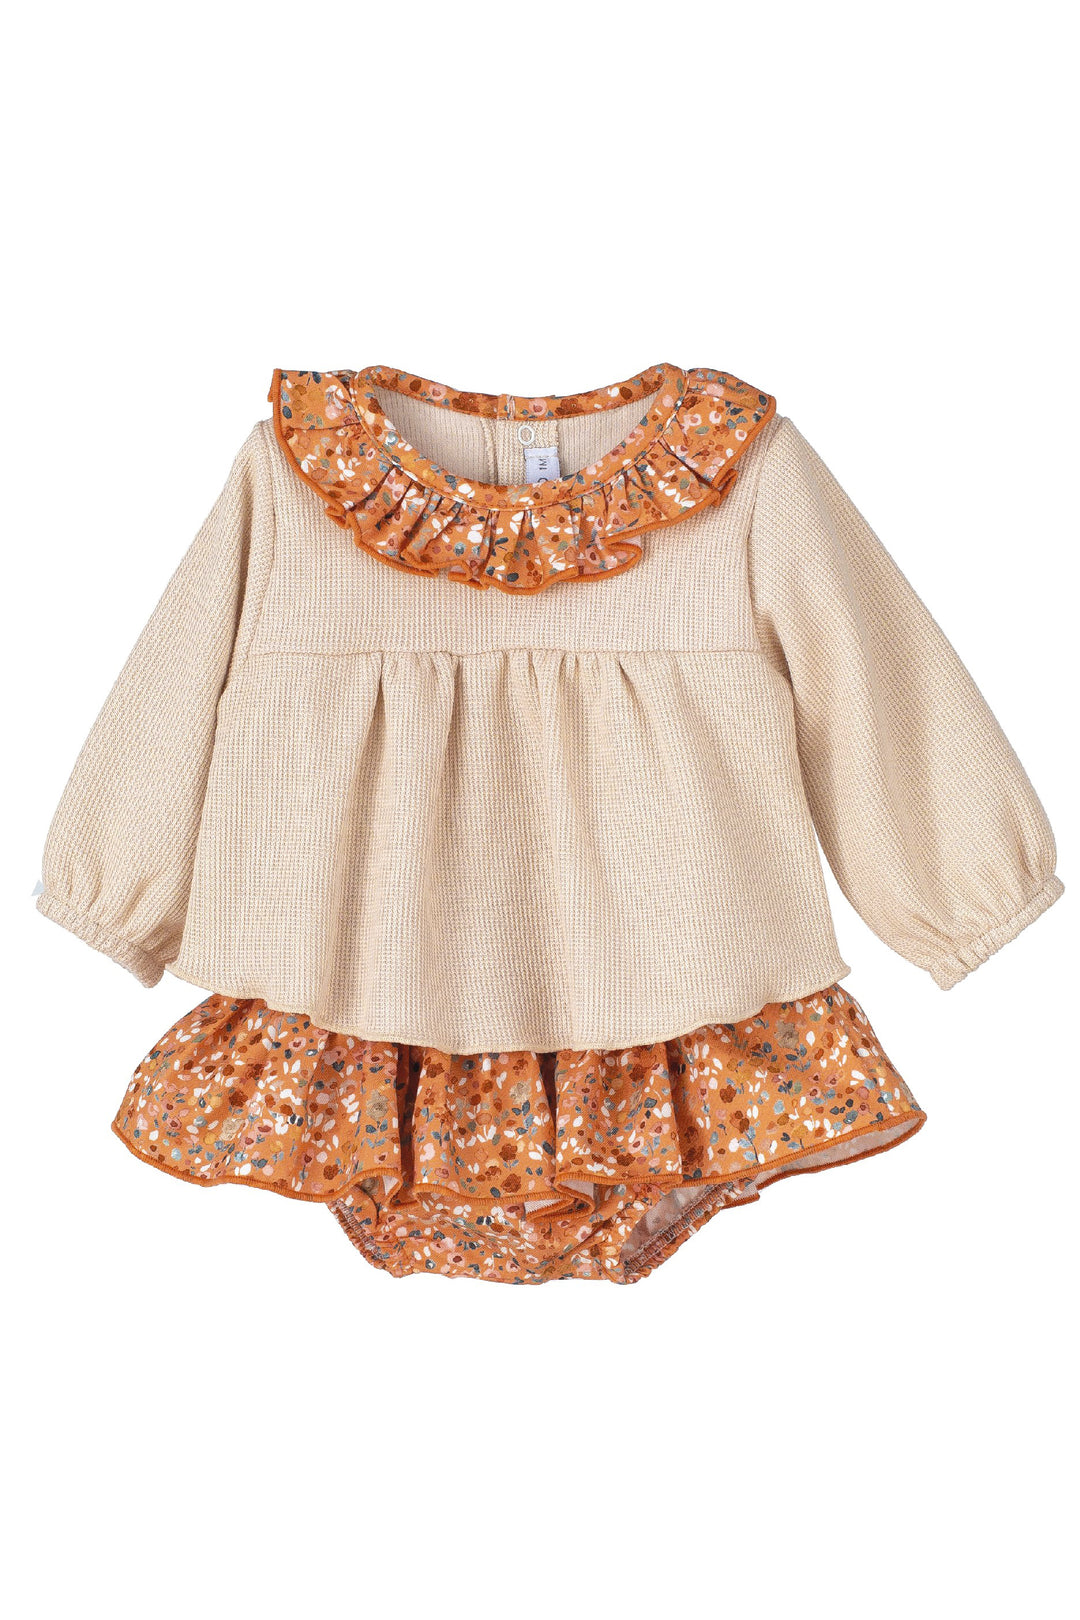 Calamaro "Vivienne" Terracotta Floral Blouse & Bloomers | Millie and John